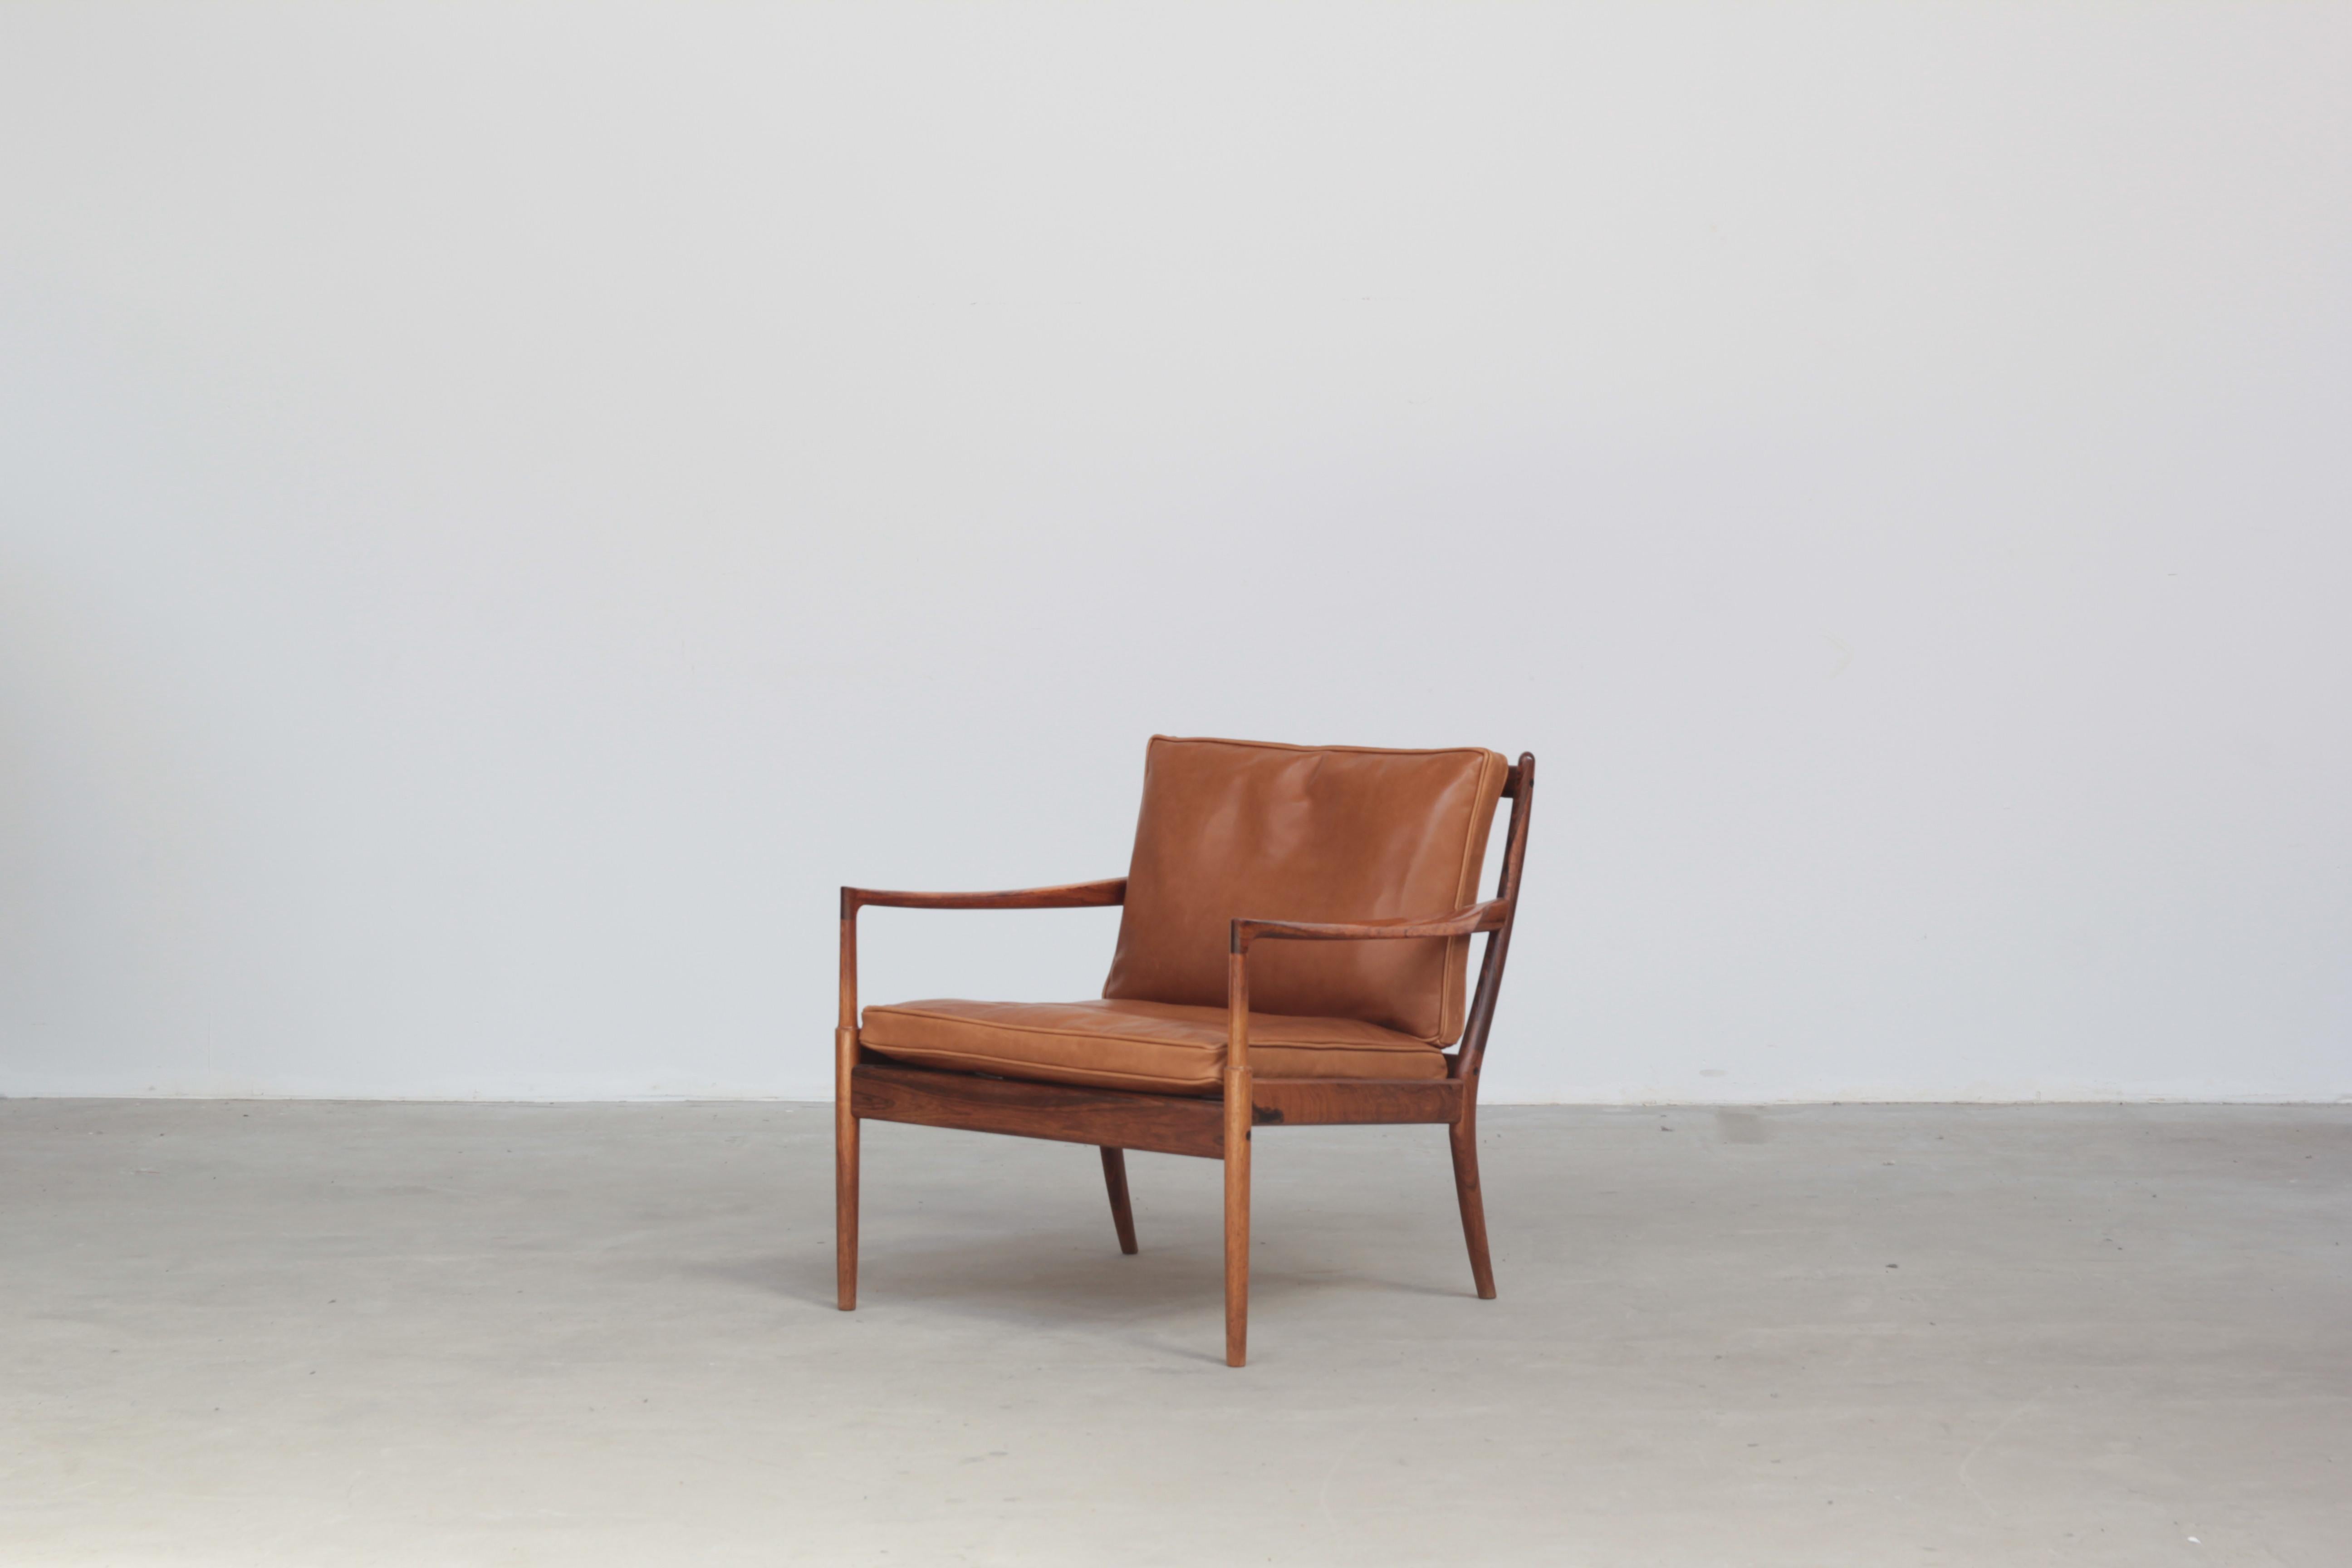 The lounge chair designed by Ib Kofod-Larsen in 1958 for OPE Mobler is a stunning example of mid-century Danish design. The chair is crafted from exquisite rosewood, which gives it a warm and luxurious feel. The brown cognac leather cushions are in